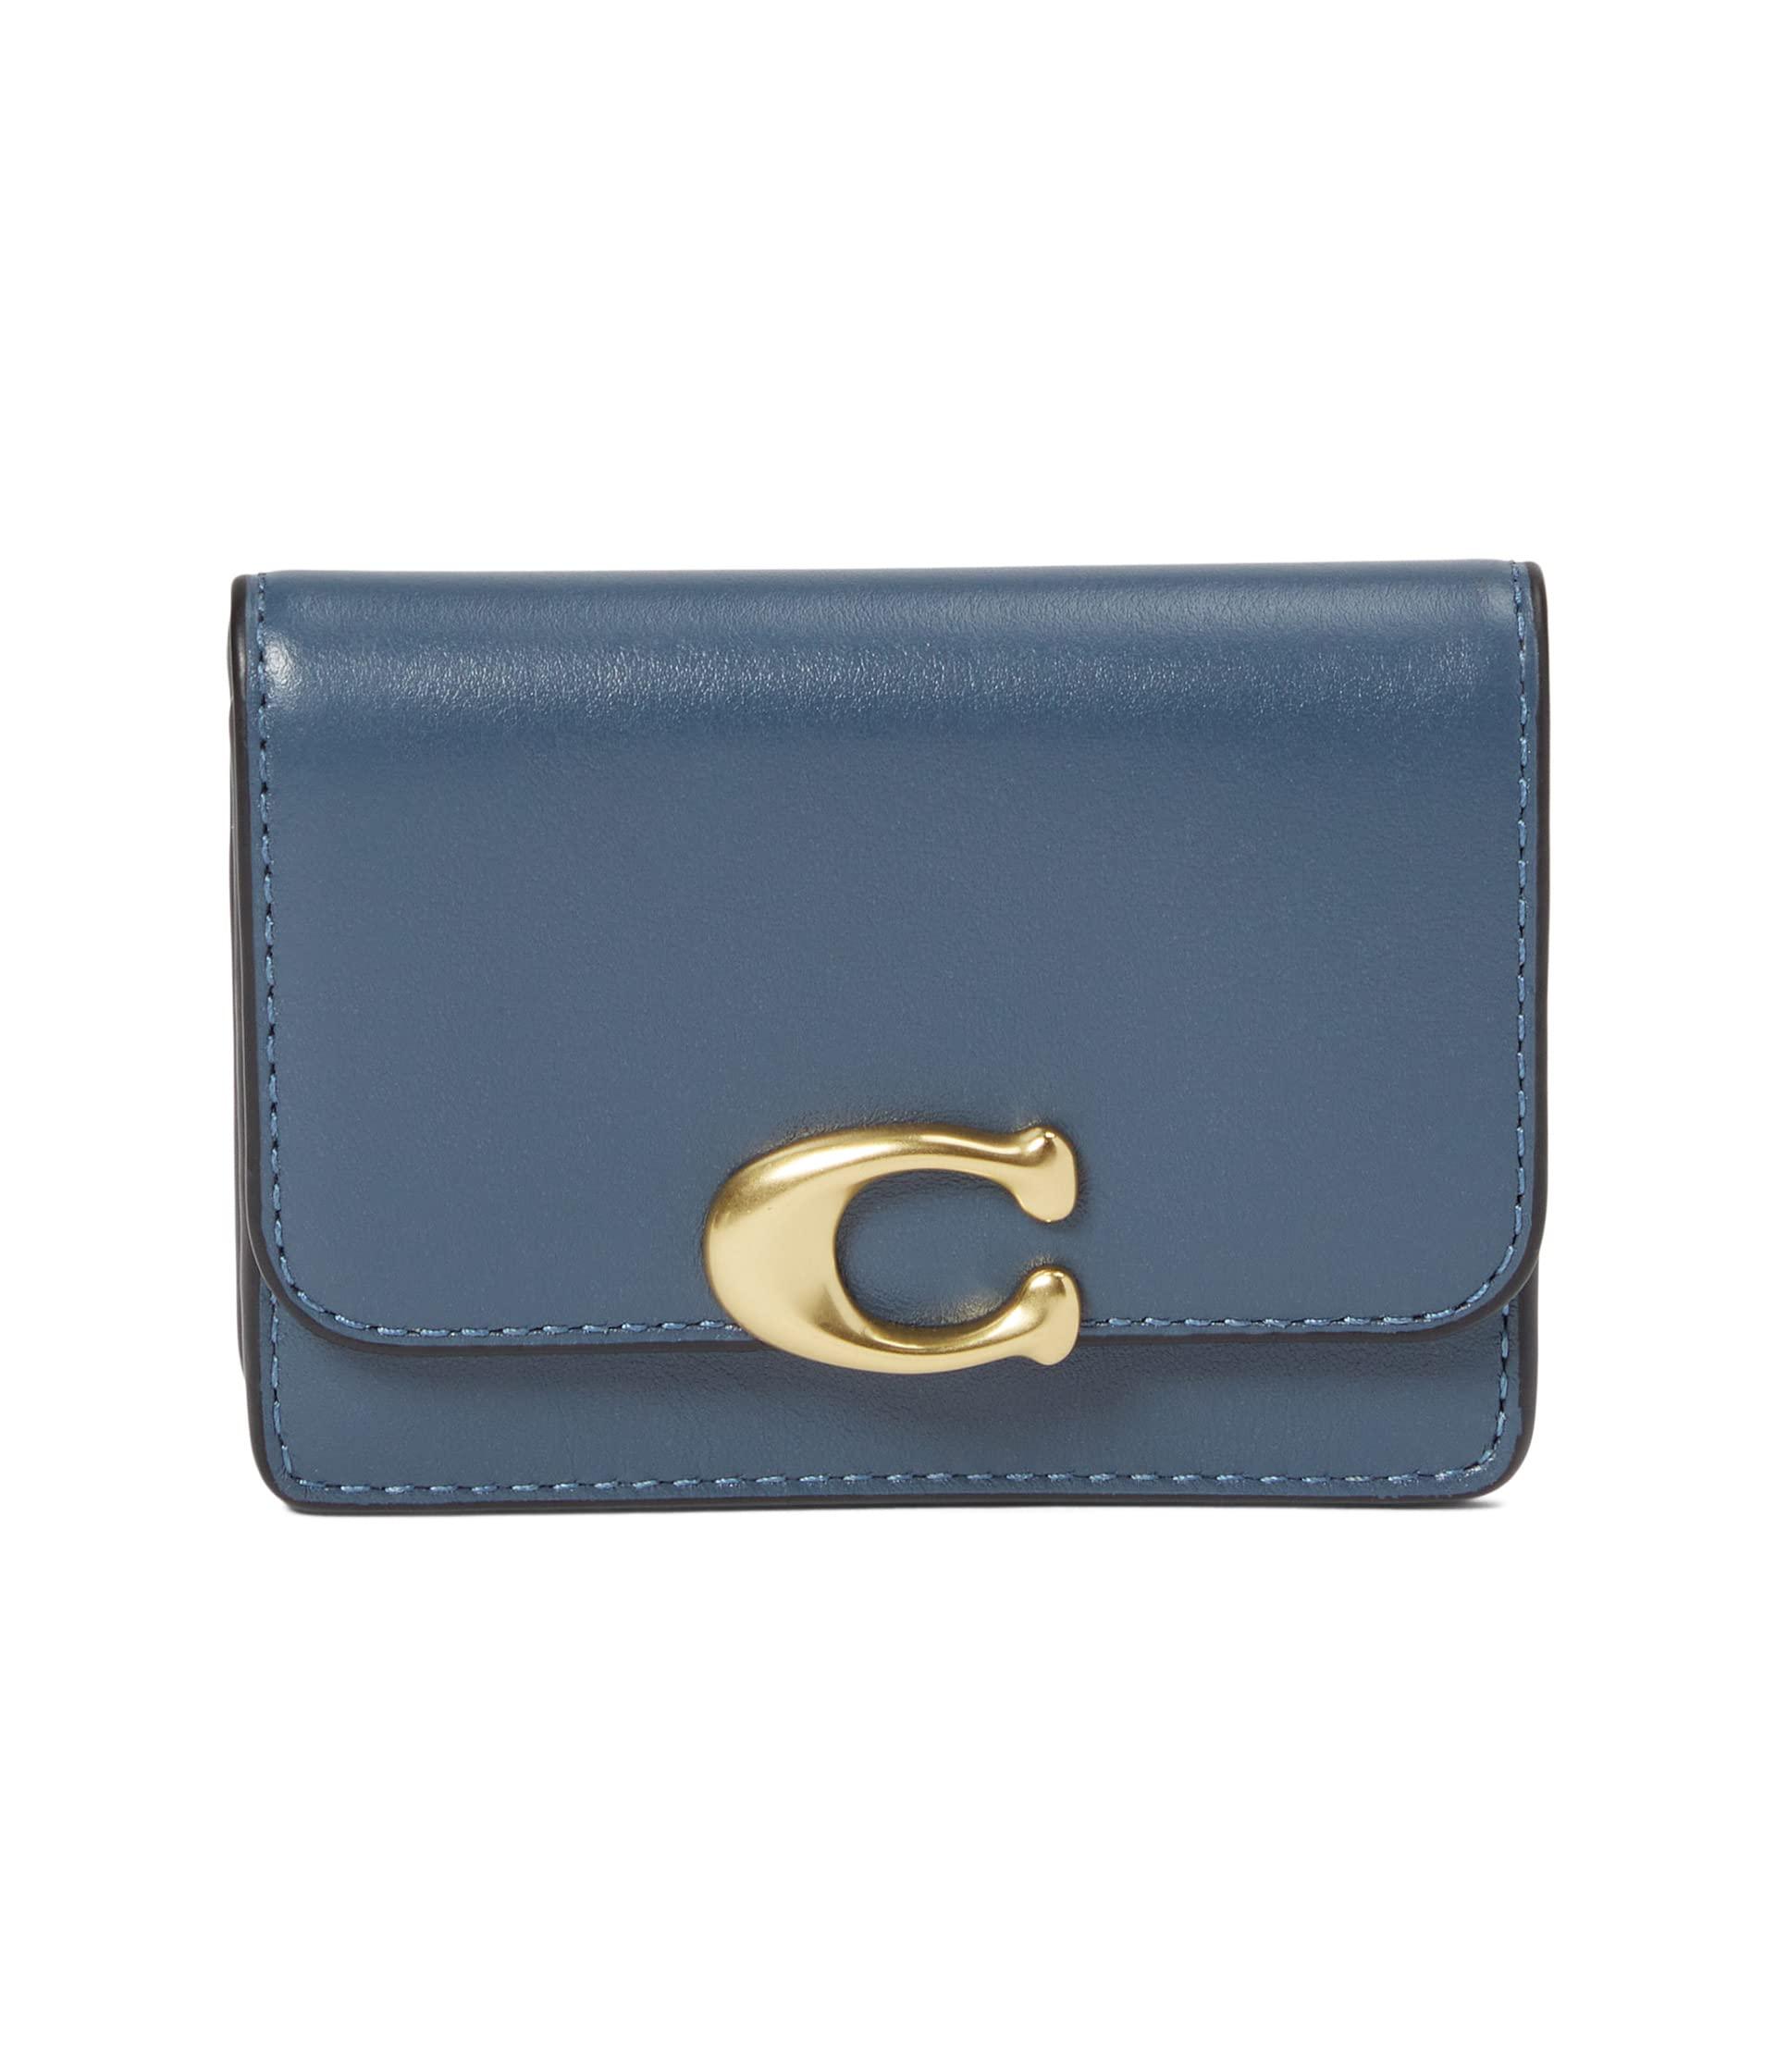 COACH Luxe Refined Calf Leather Bandit Card Case in Blue | Lyst